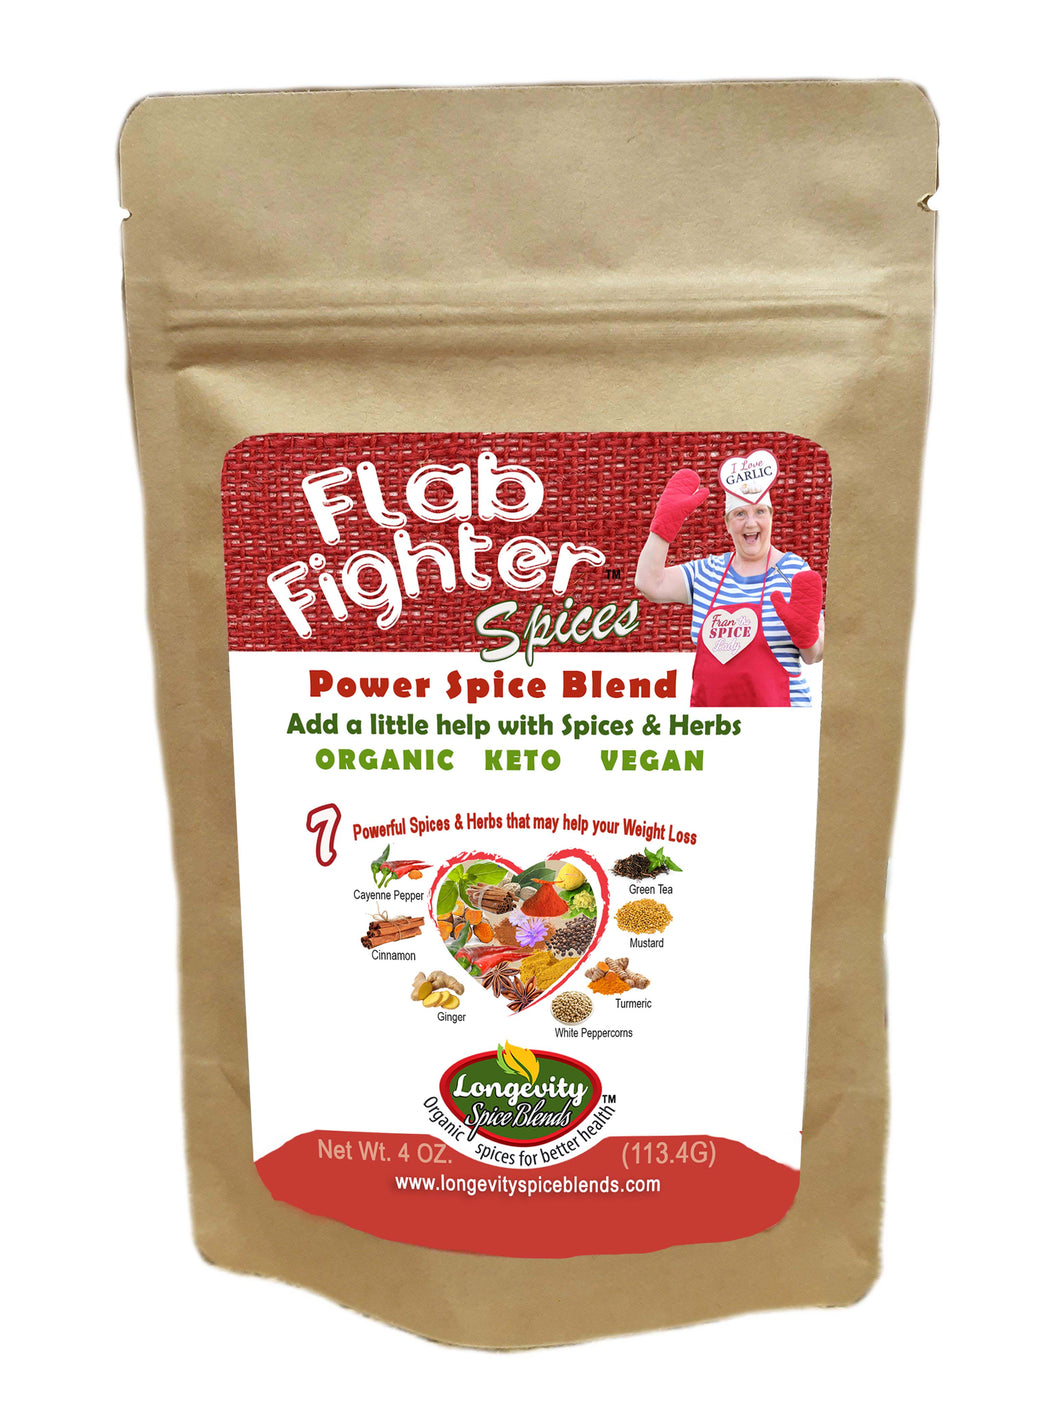 Flab Fighter Spice Blend: Ignite Weight Loss with Nature's Finest Spices and Herbs, designed to enhance your weight loss journey